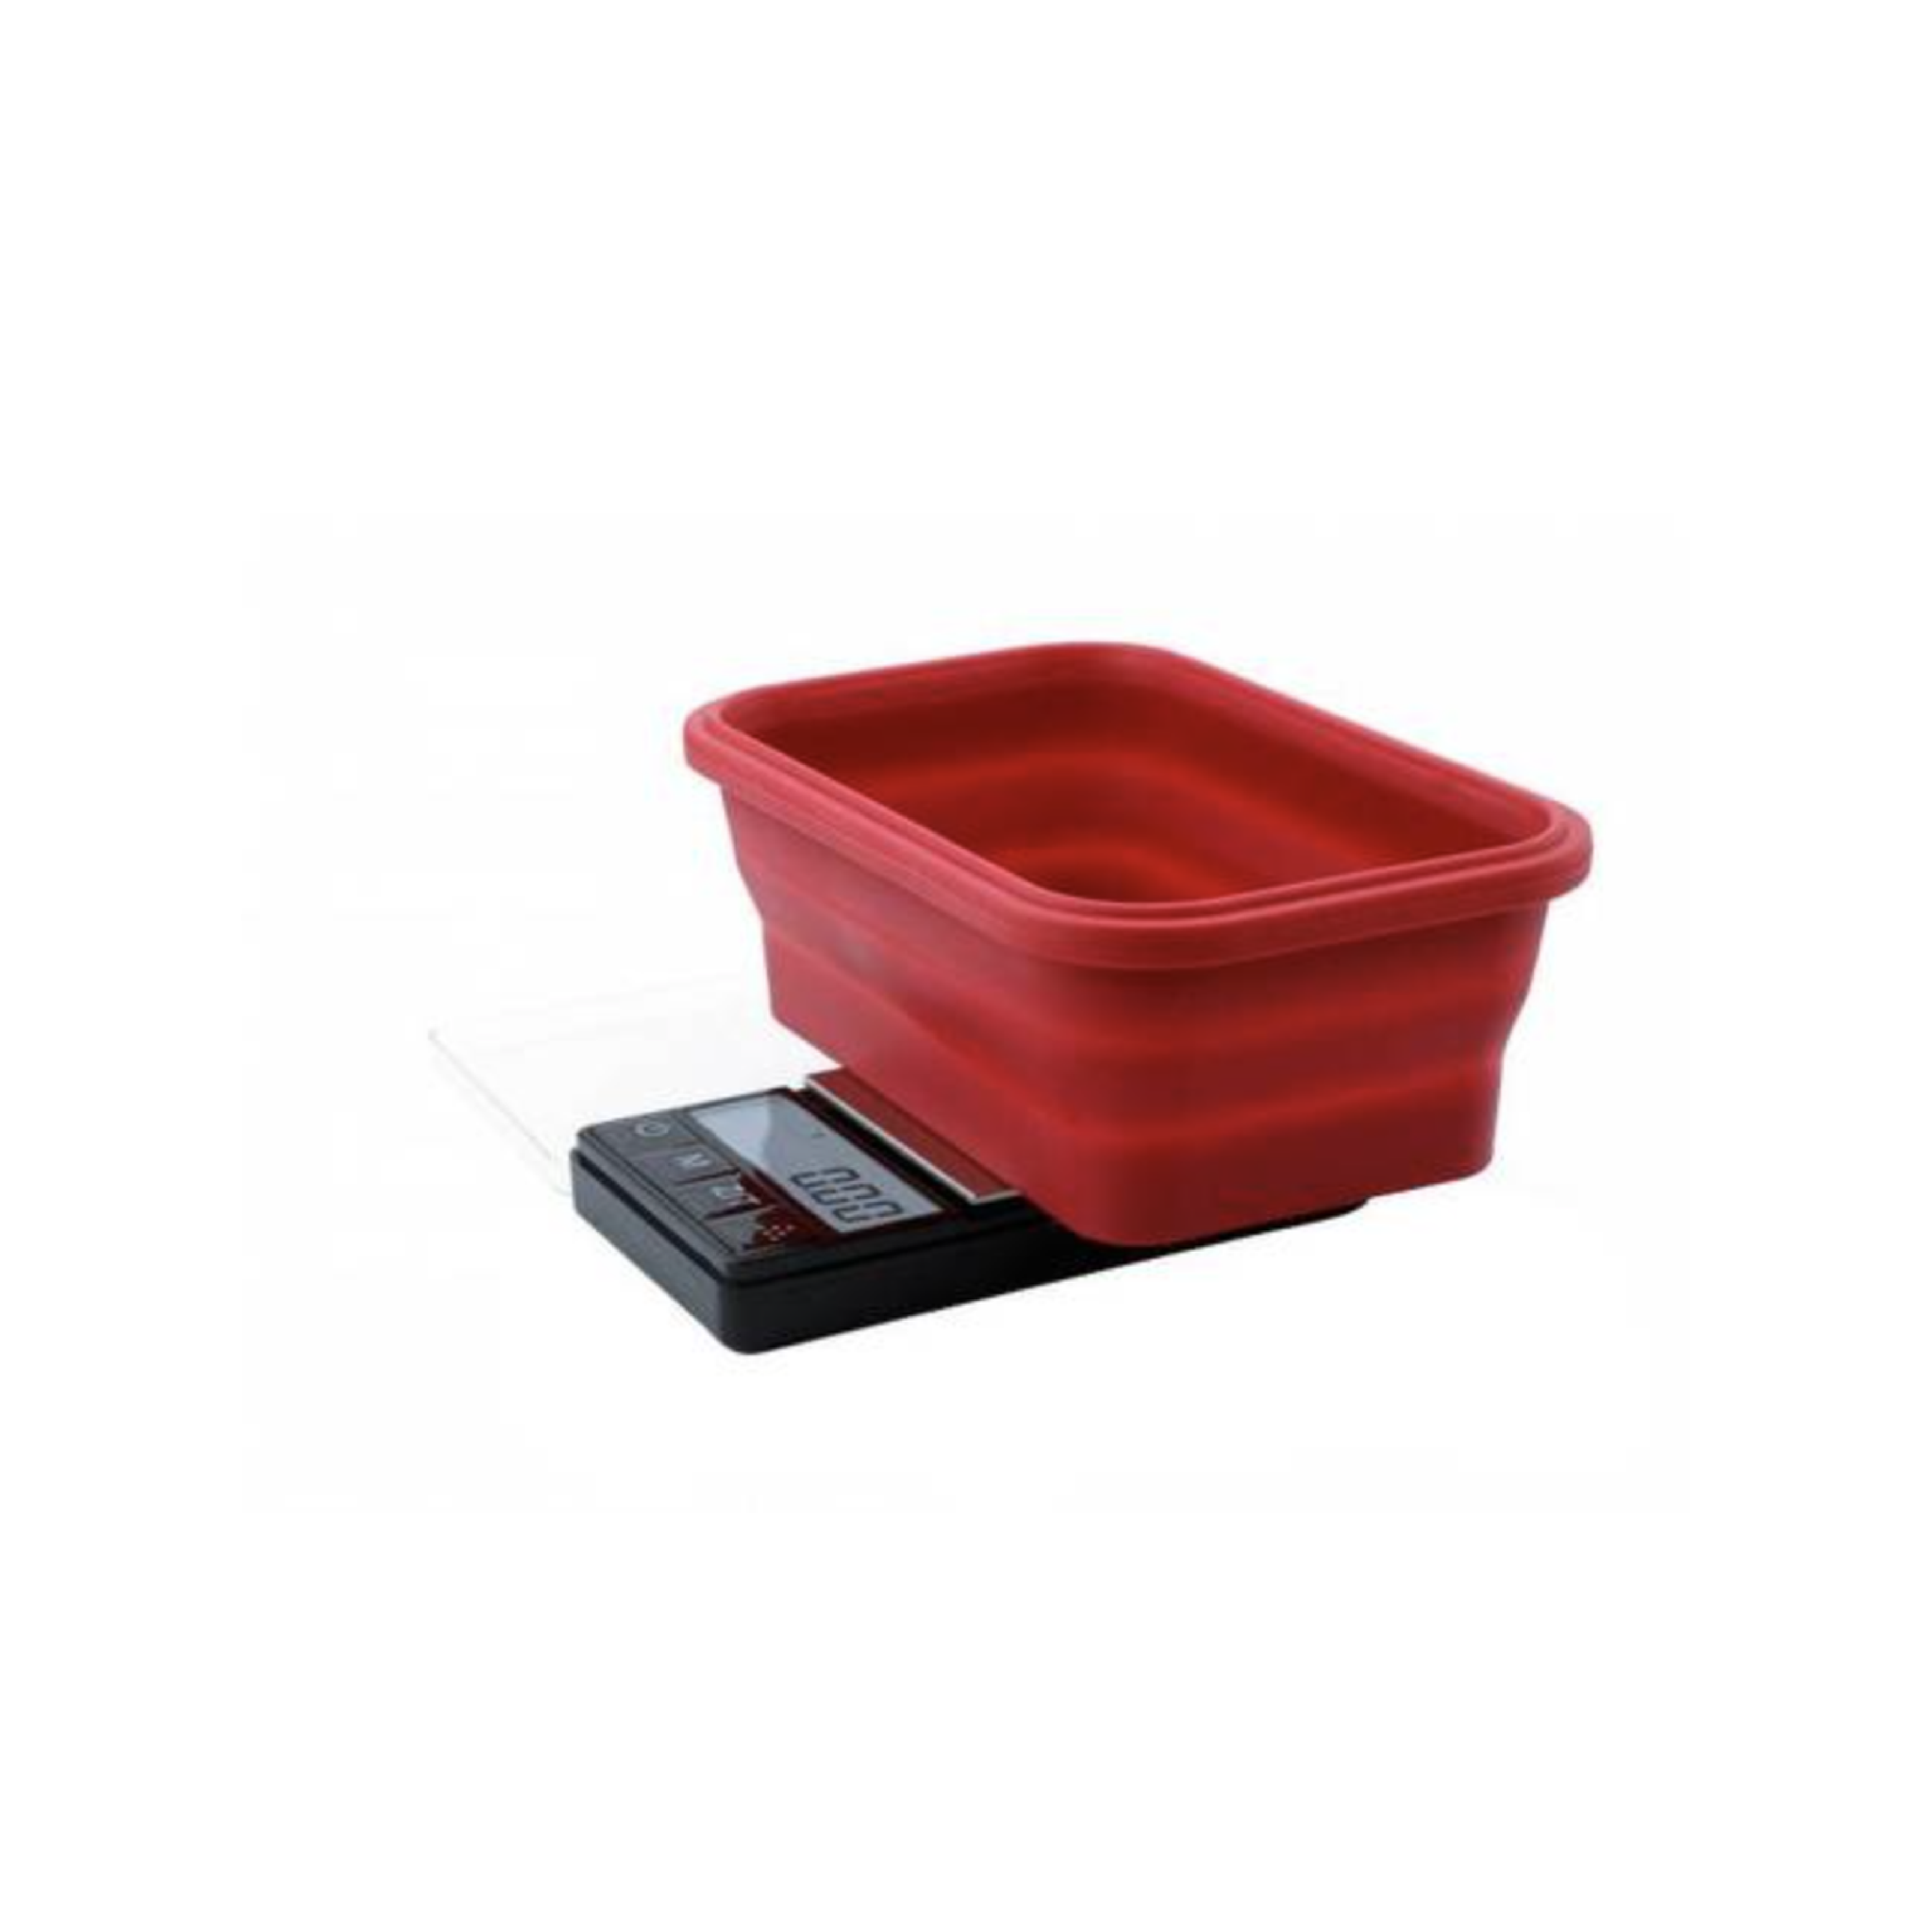 Collapsible Bowl Scale 200g x 0.01g